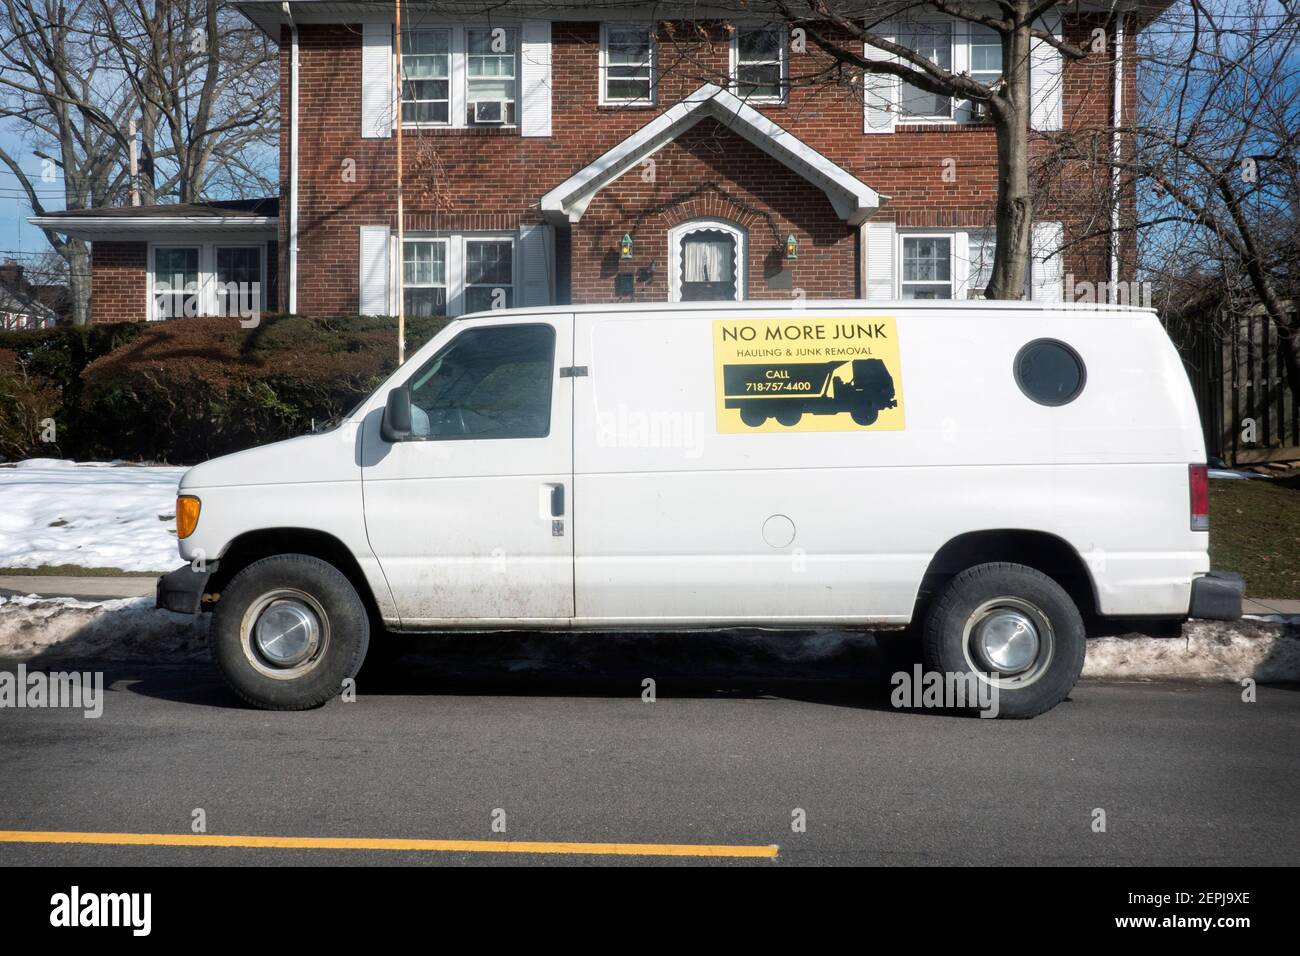 NO MORE JUNK. A parked truck van with a sign advertising for a hauling & junk removal service. In Queens, New York City. Stock Photo